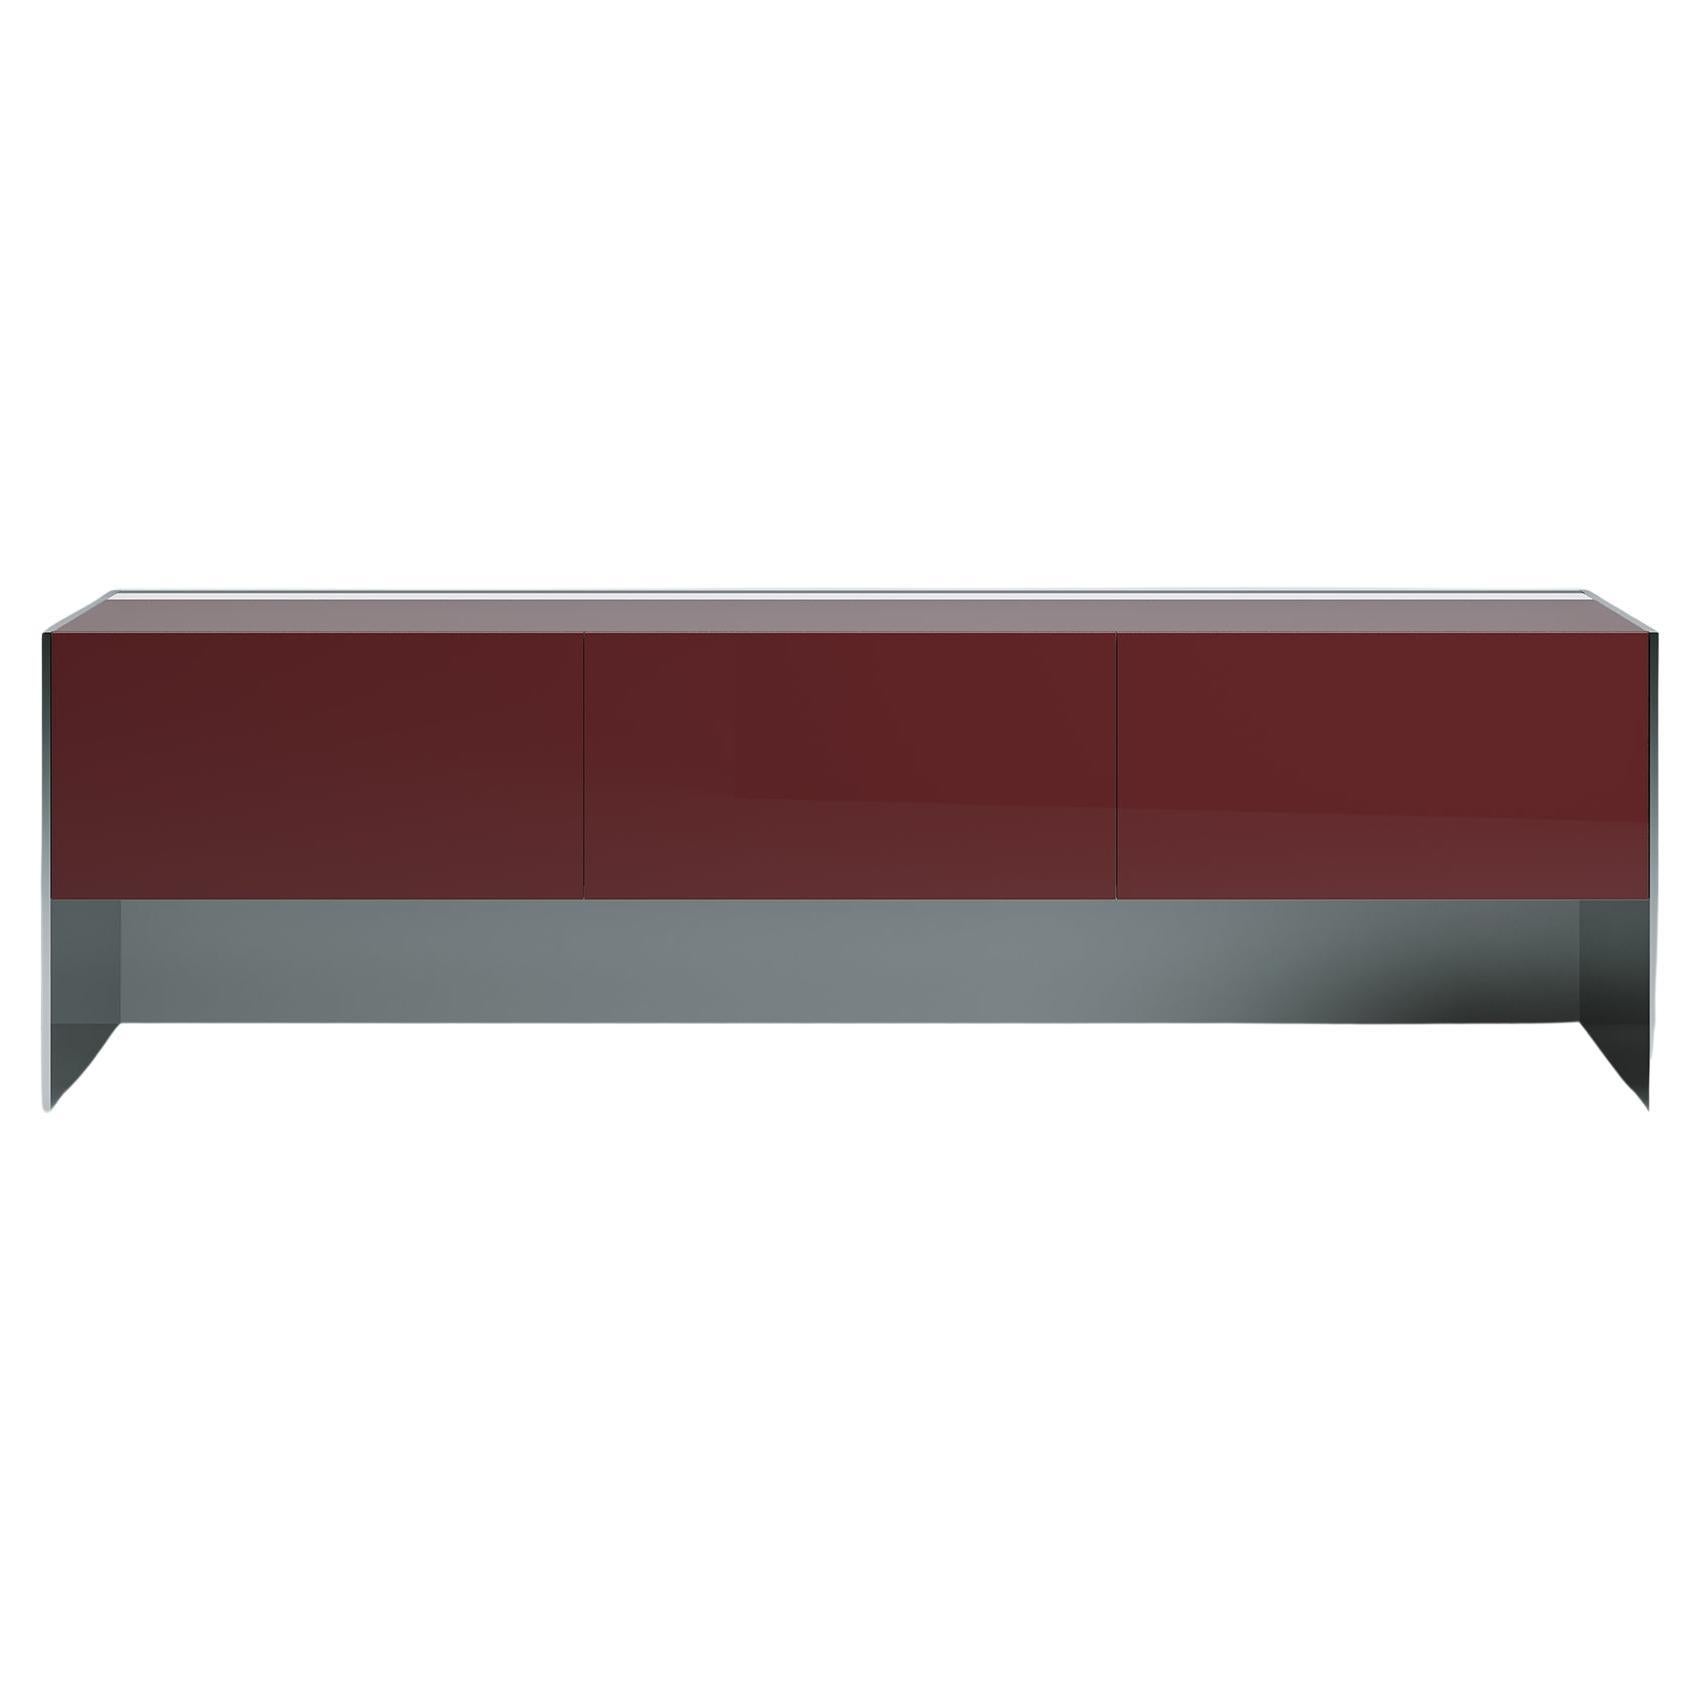 Acerbis Steel Sideboard in Glossy Lacquered Burgundy Top & Doors w Steel Sides For Sale